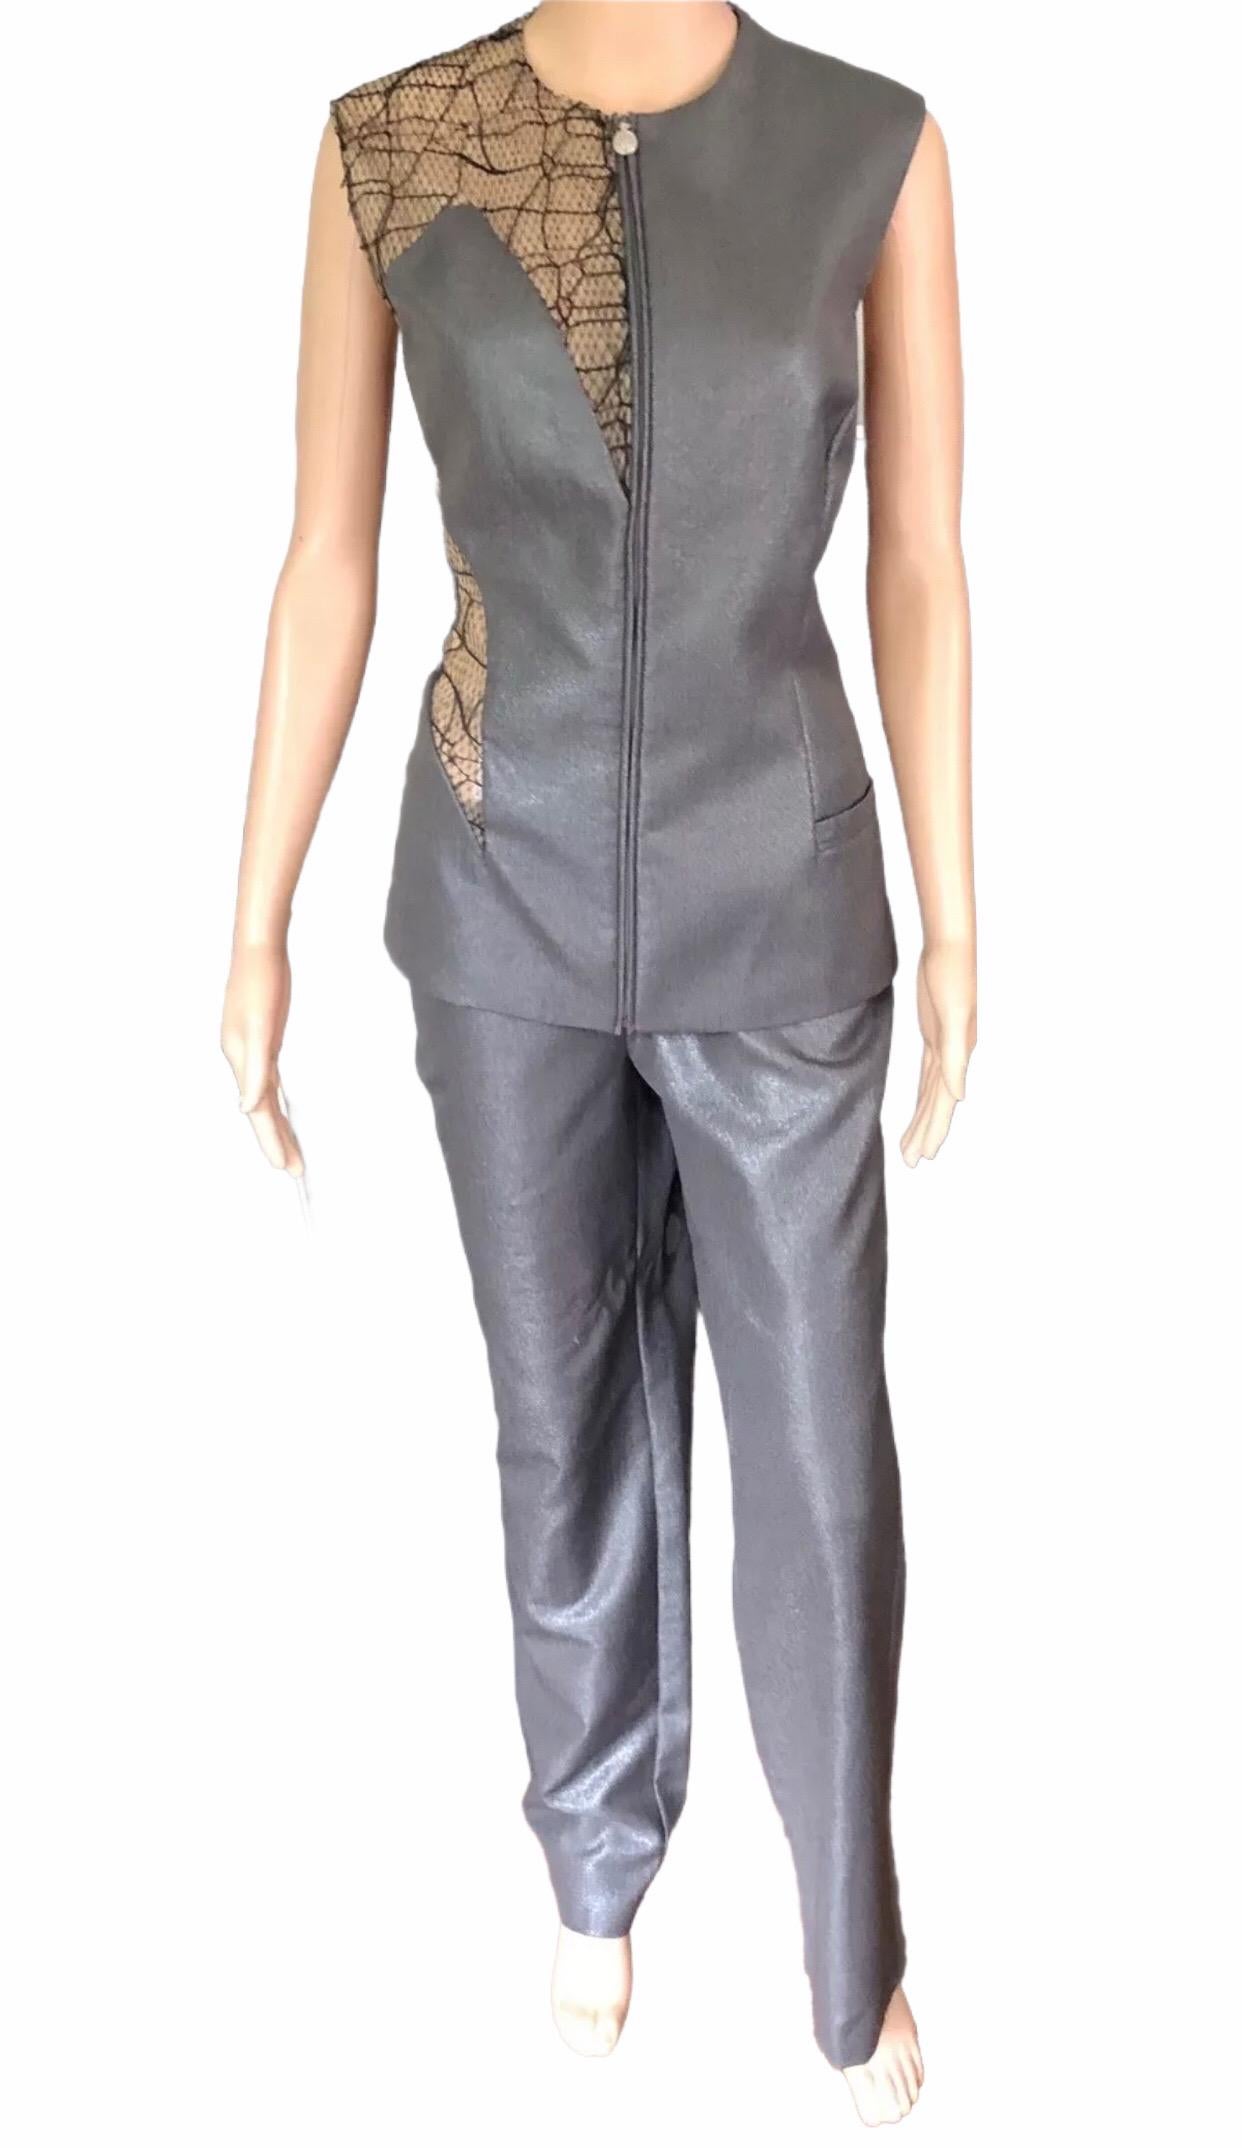 Gianni Versace S/S 1998 Runway Sheer Cutout Panels Top & Pants Suit 2 Piece Set In Good Condition For Sale In Naples, FL